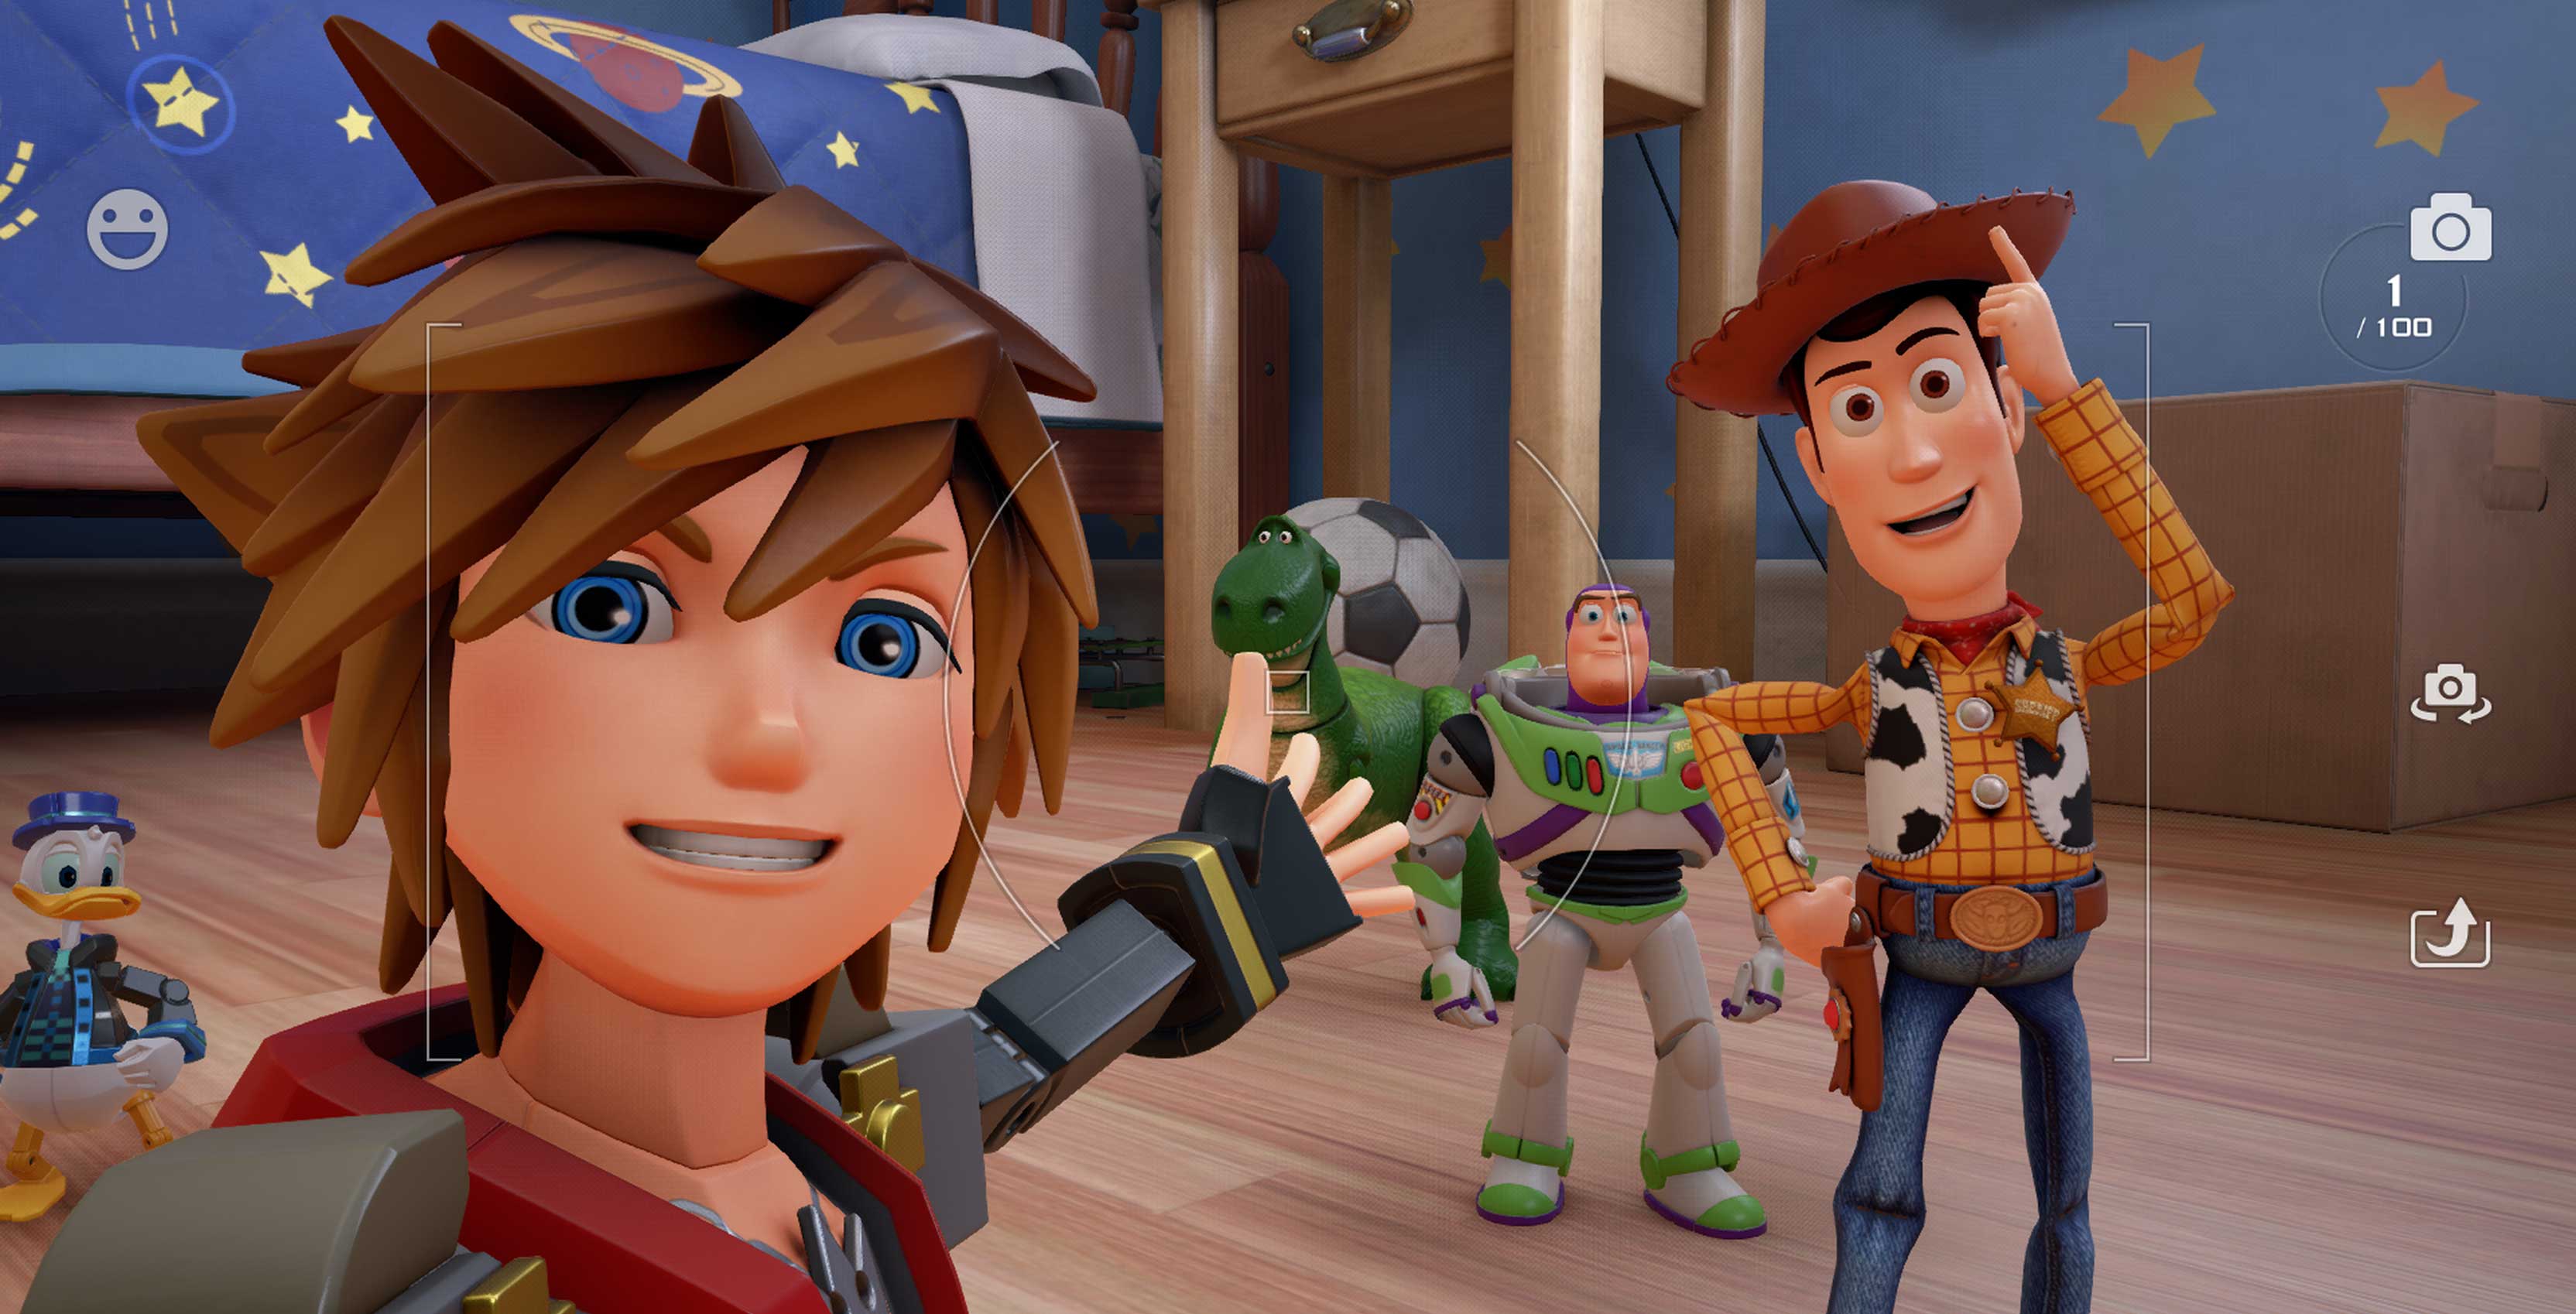 Konsulat selvfølgelig Behov for Kingdom Hearts 3 is well worth the long wait [This Week in Gaming]